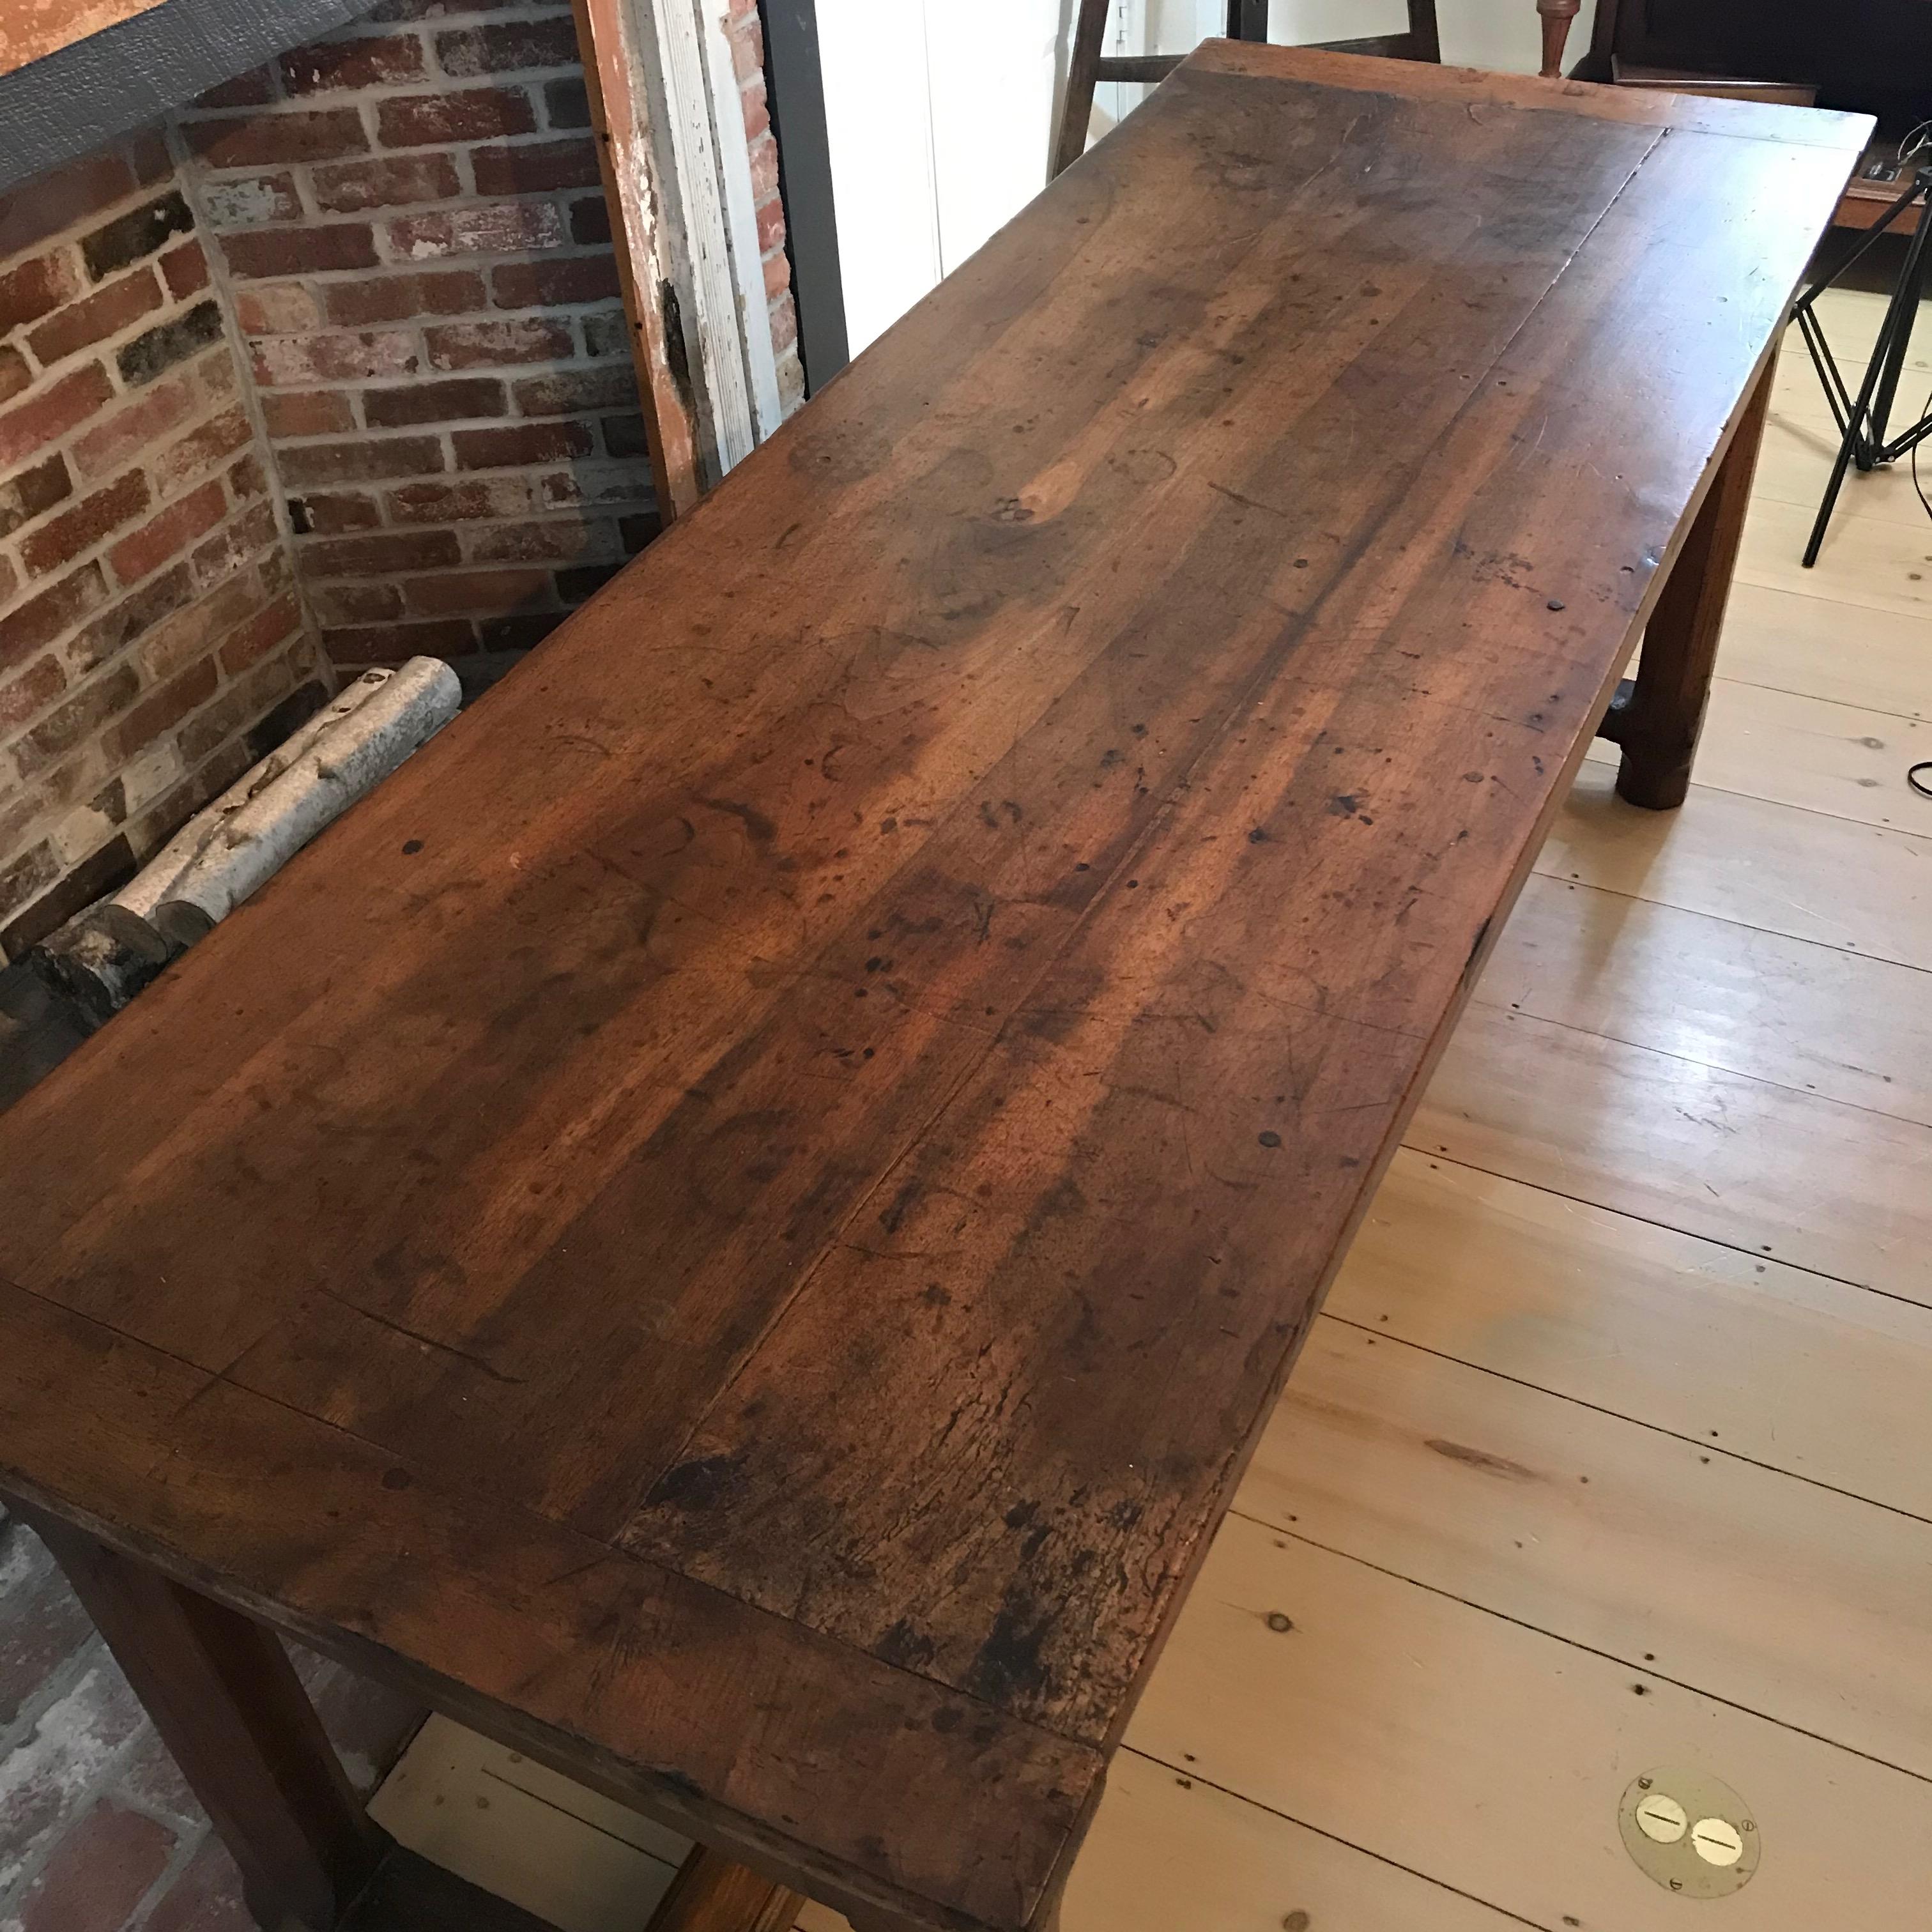 A spectacularly aged walnut farmhouse table from Southern France having a marvelous solid thick top, canted corners and breadboard ends. A large end drawer resides in the table’s apron, allowing for unexpected and convenient storage. The robust